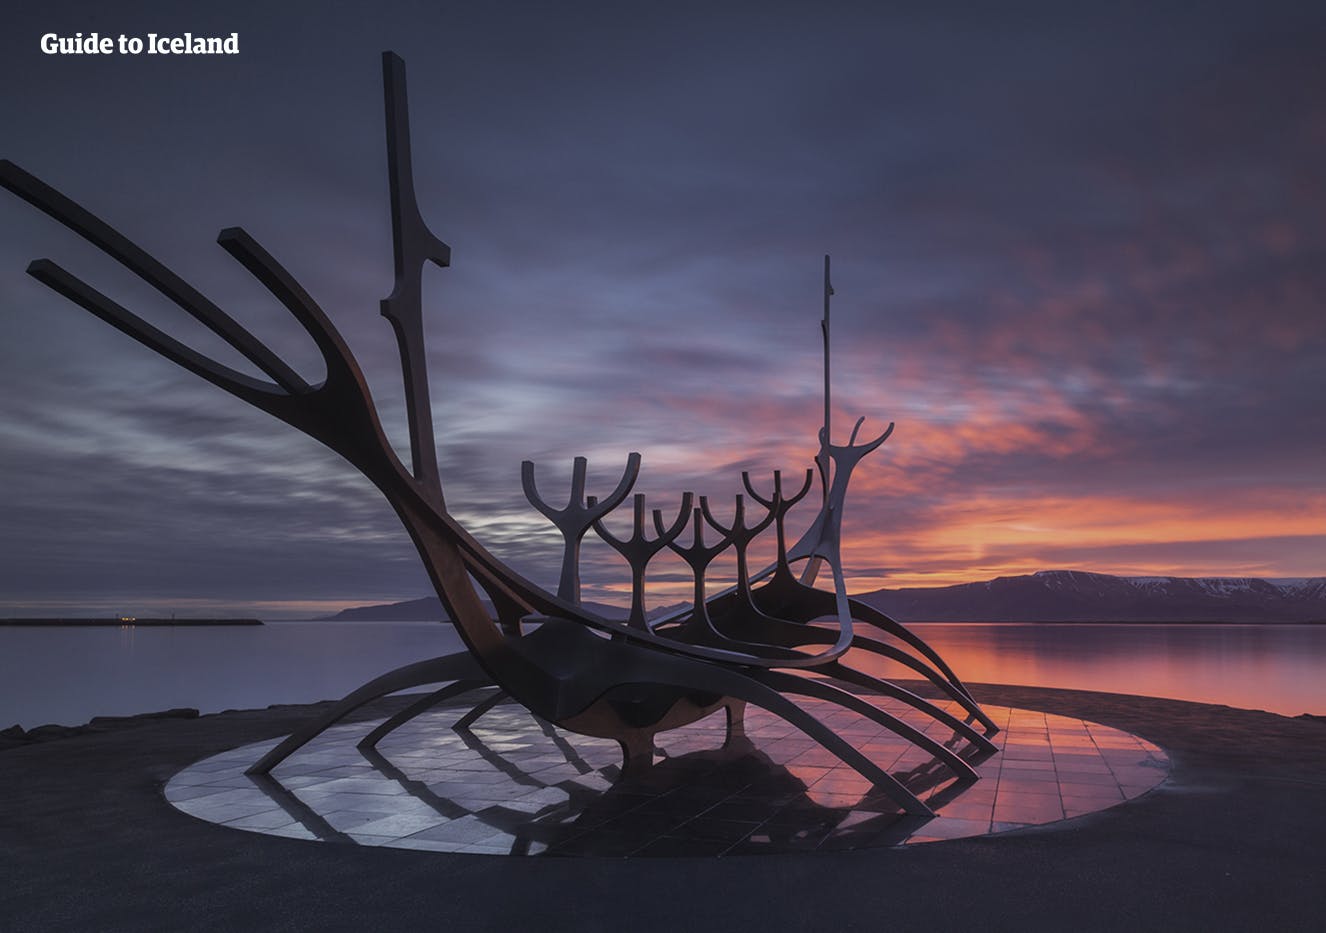 The Sun Voyager monument on the shore of Iceland's capital city of Reykjavik.